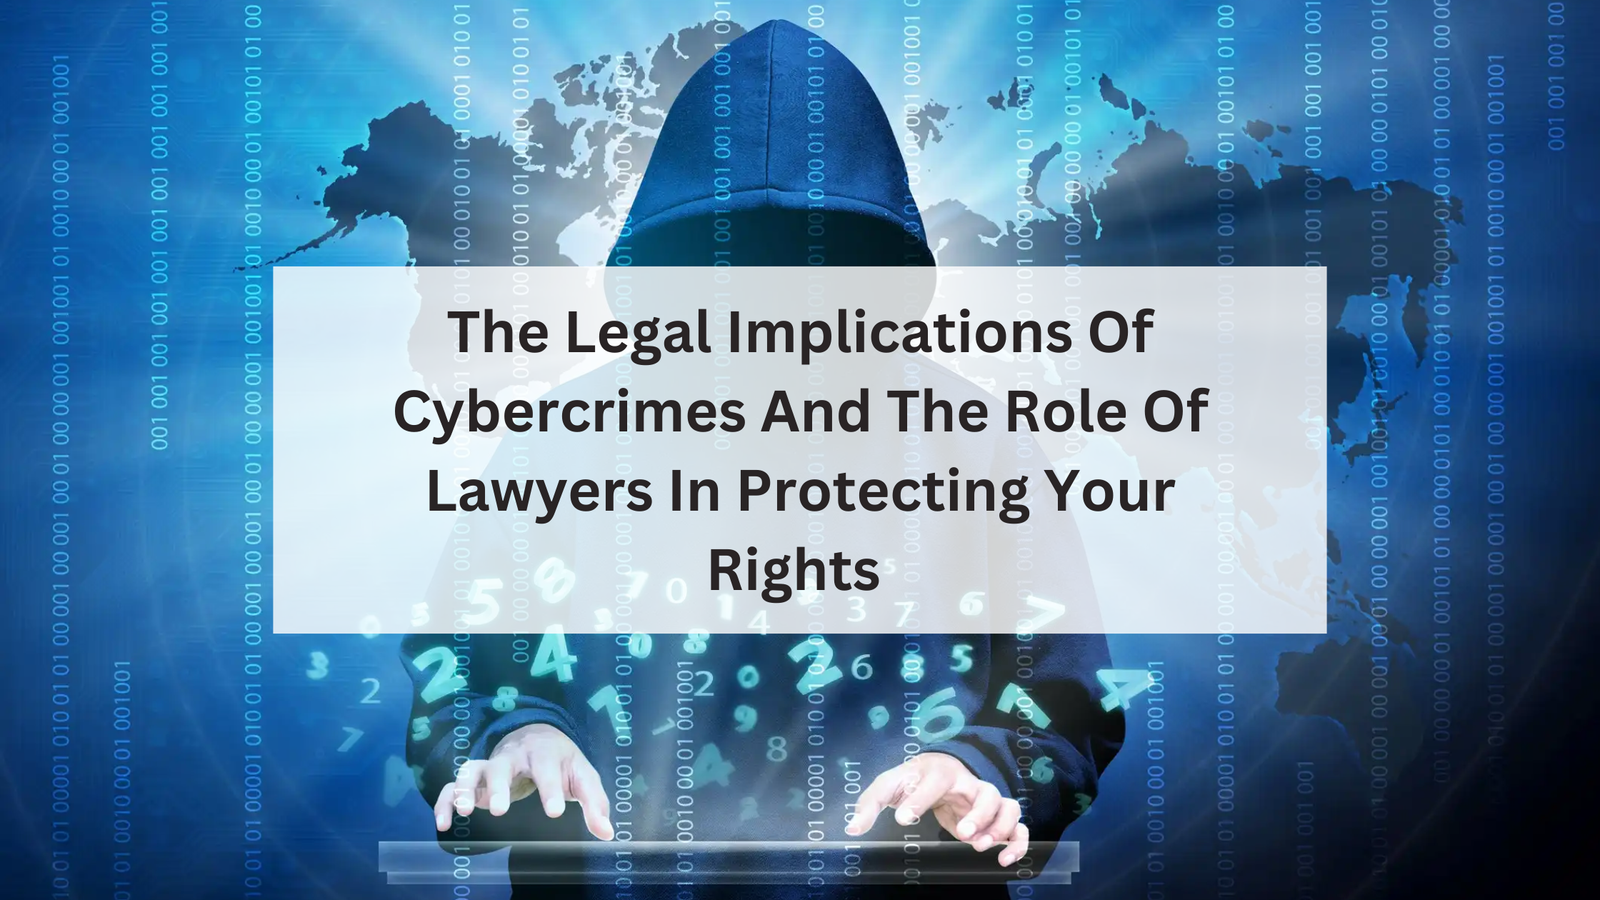 The Legal Implications Of Cybercrimes